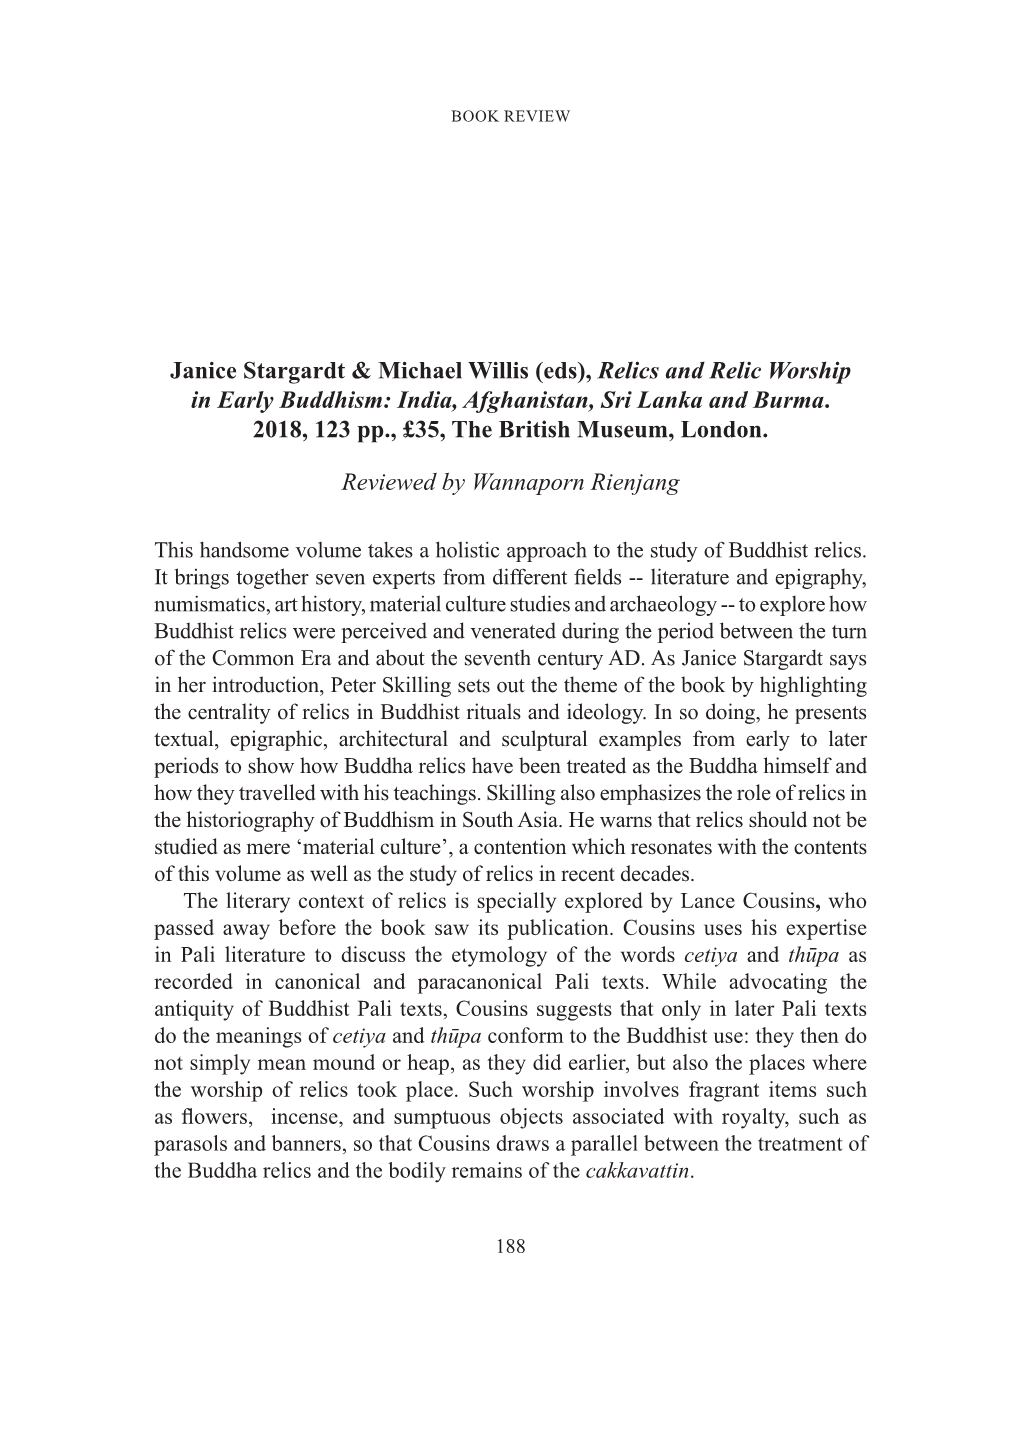 Janice Stargardt & Michael Willis (Eds), Relics and Relic Worship in Early Buddhism: India, Afghanistan, Sri Lanka and Burm